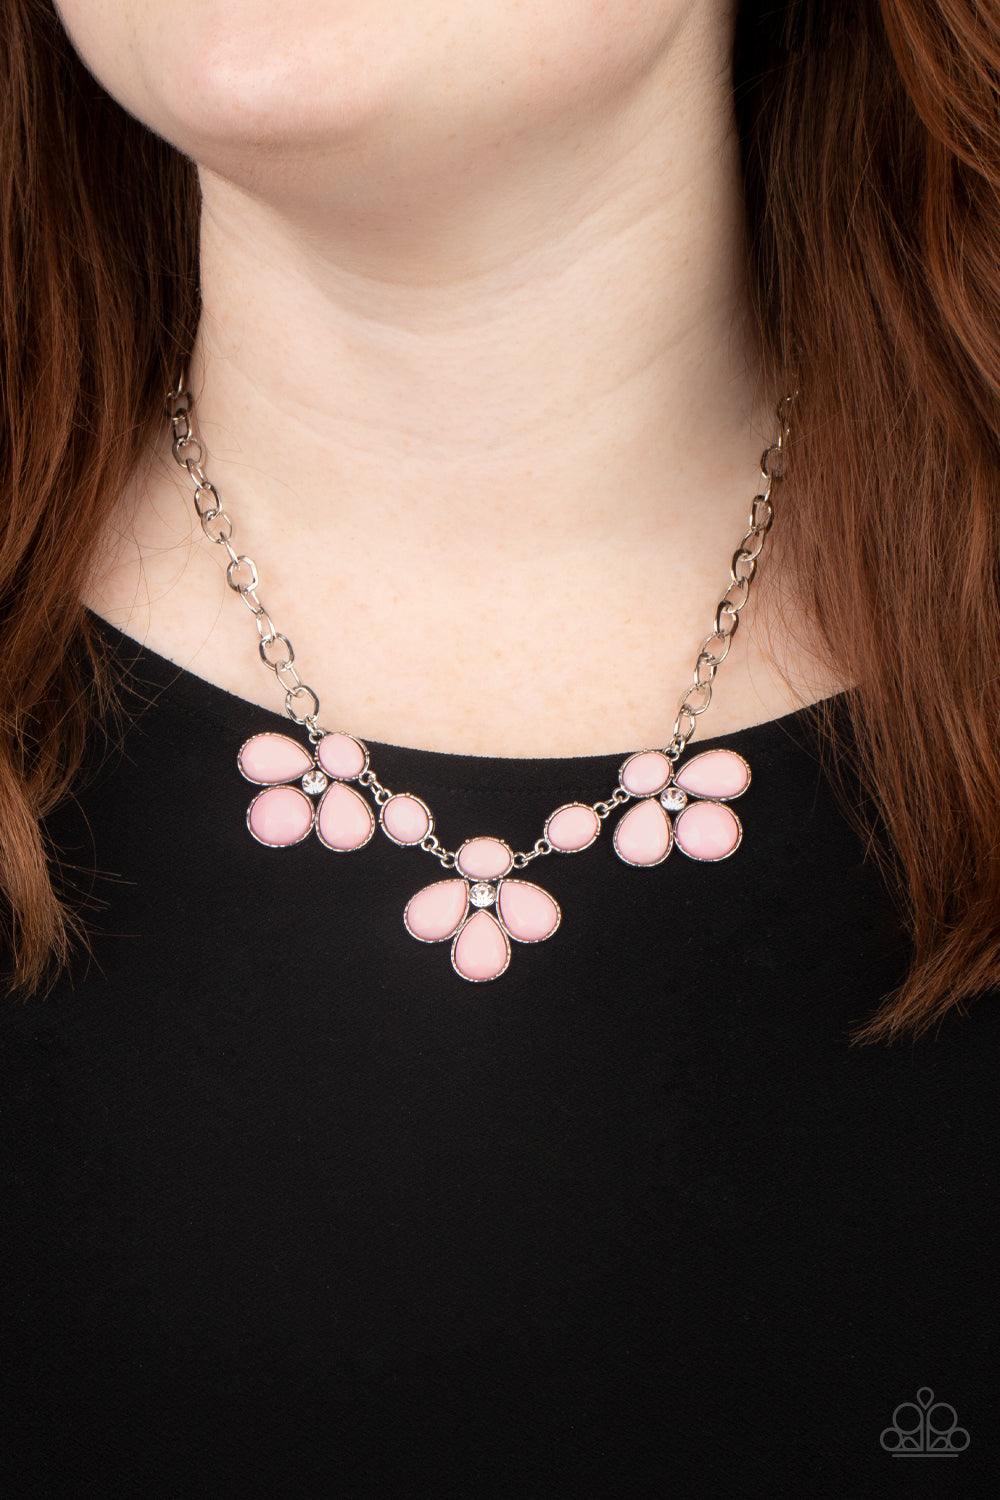 Paparazzi “SELFIE-Worth” Pink Necklace Earring Set